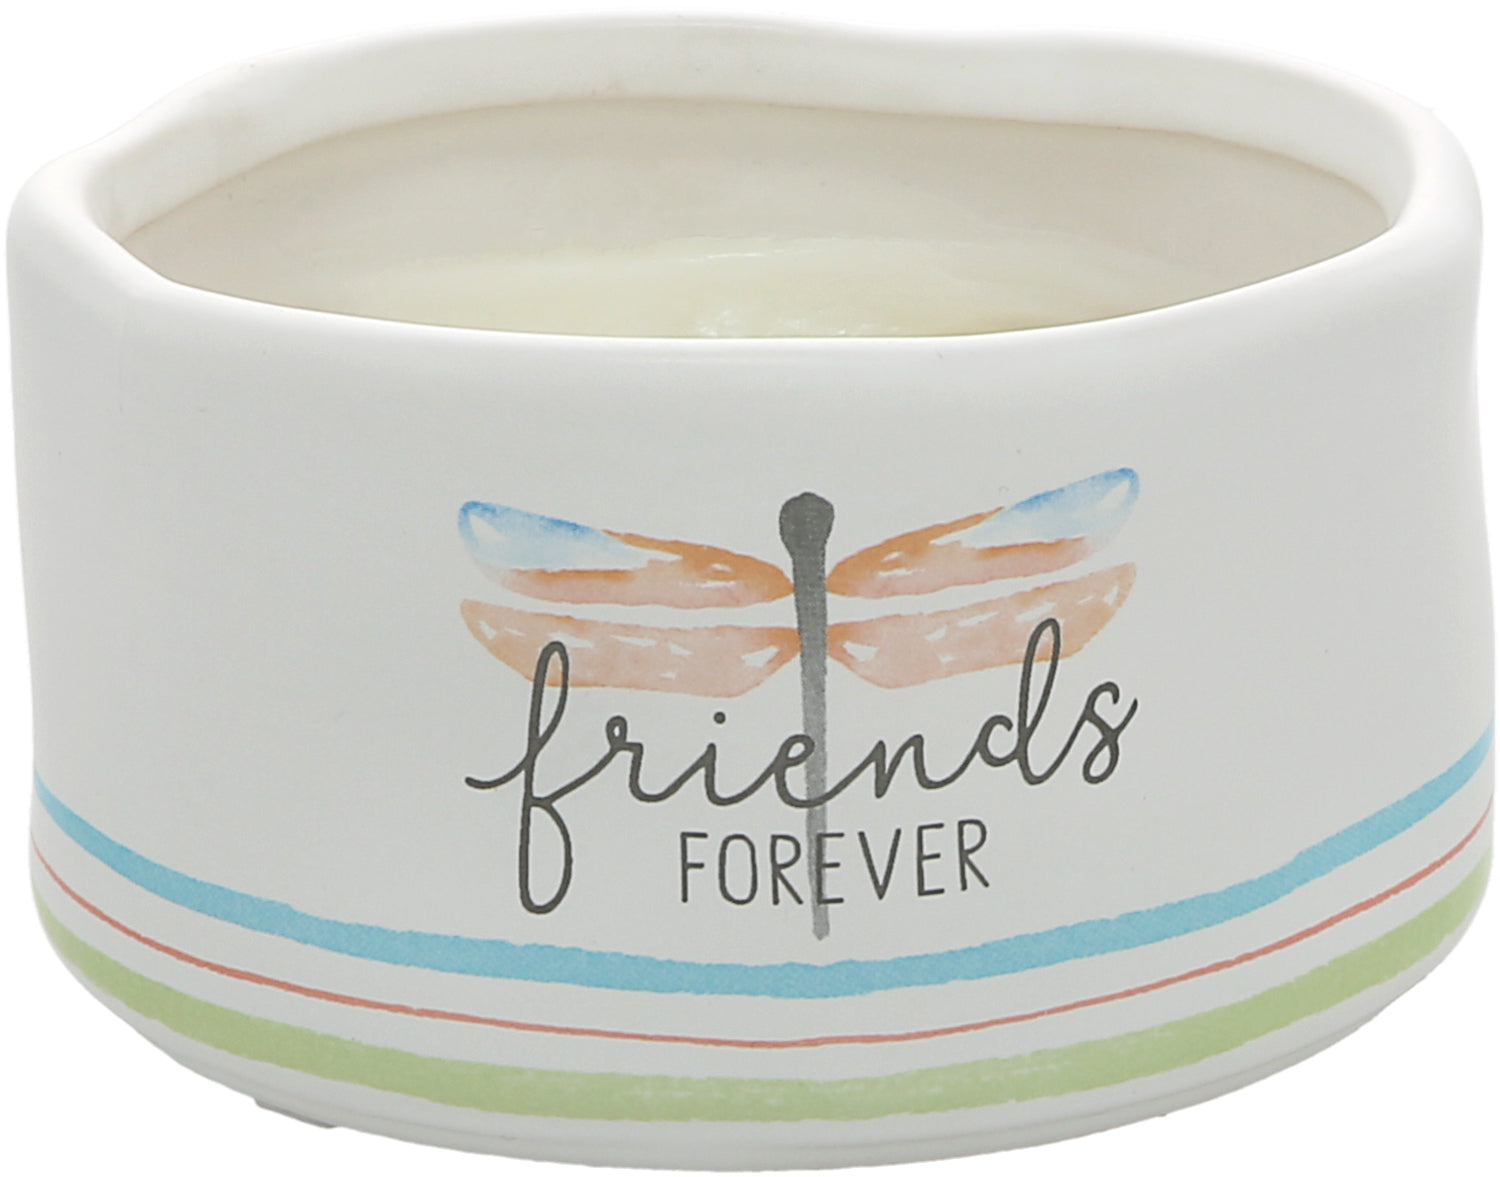 100% Soy Wax Reveal Candle 8oz. Scent: Tranquility